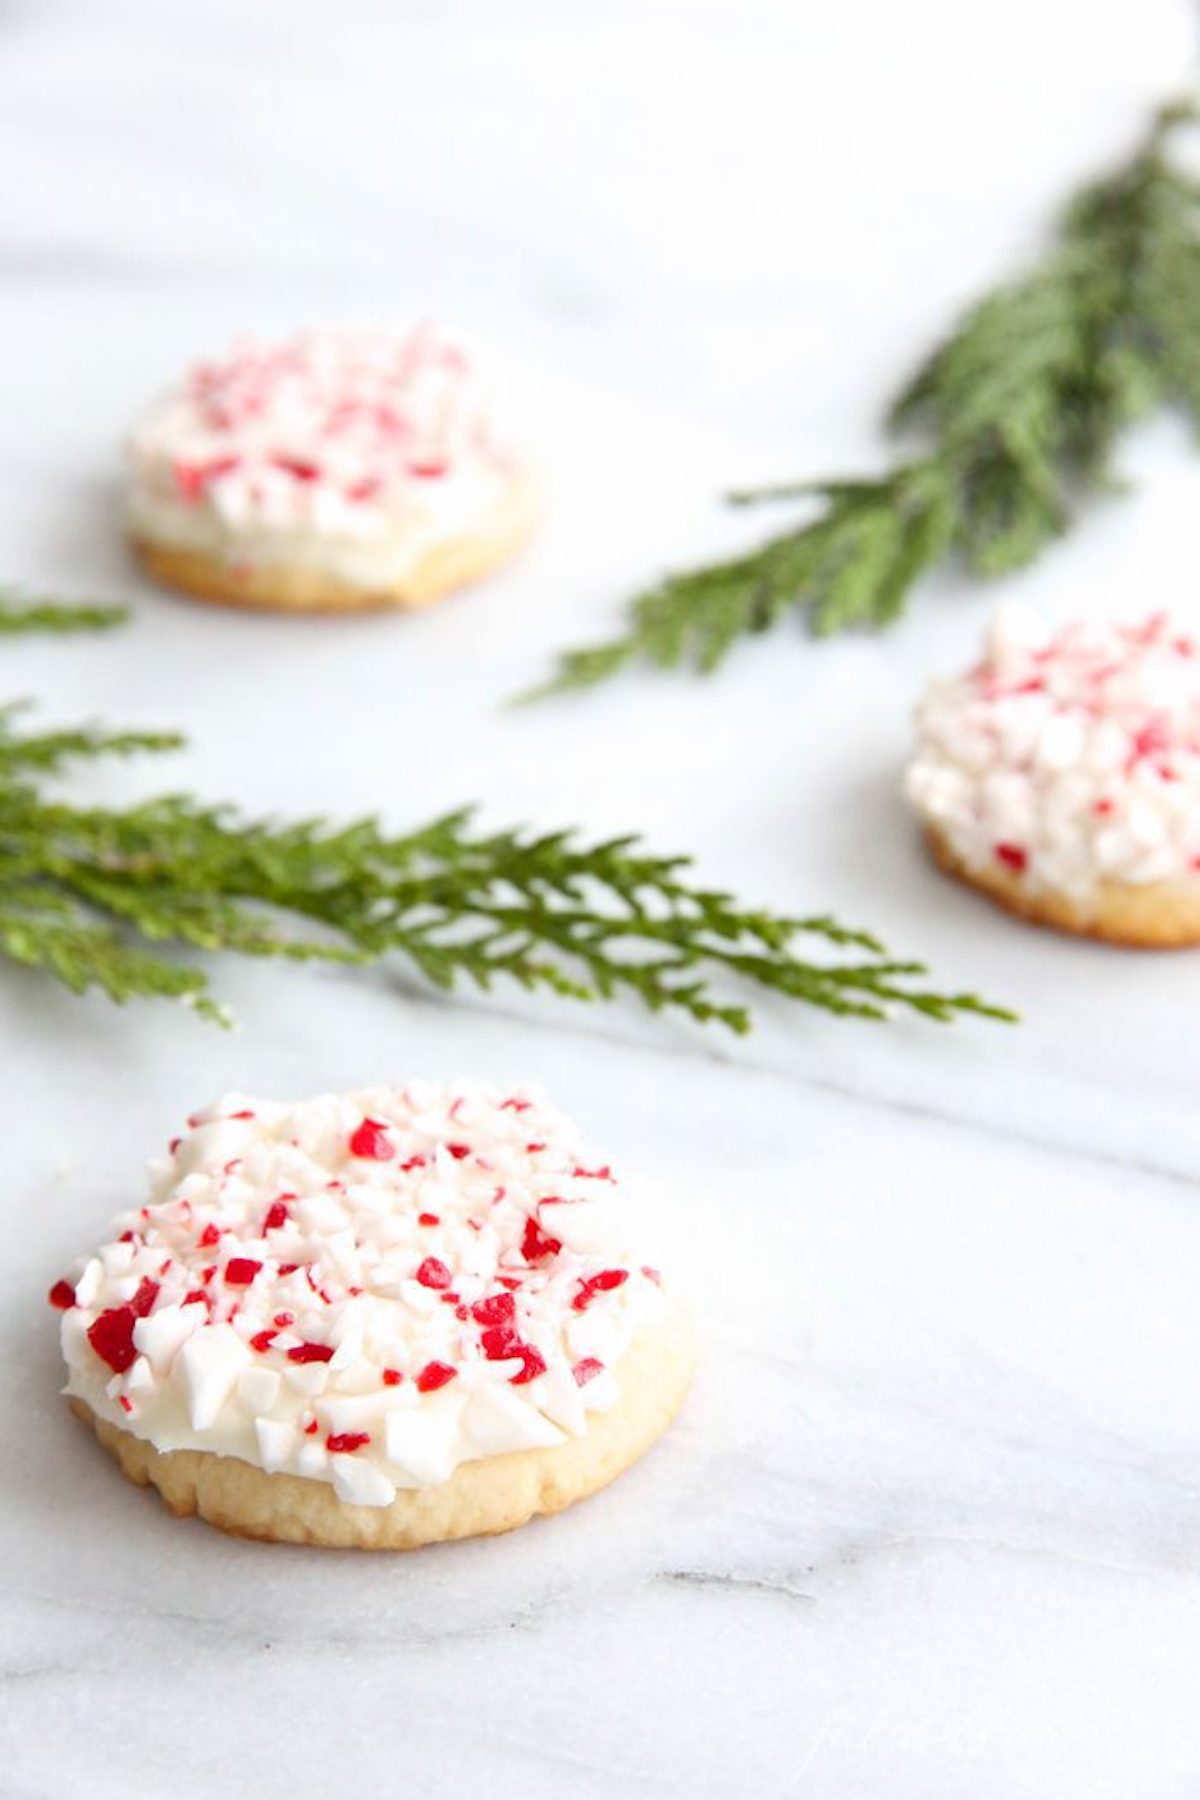                Peppermint-flavored cookies on a marble table.